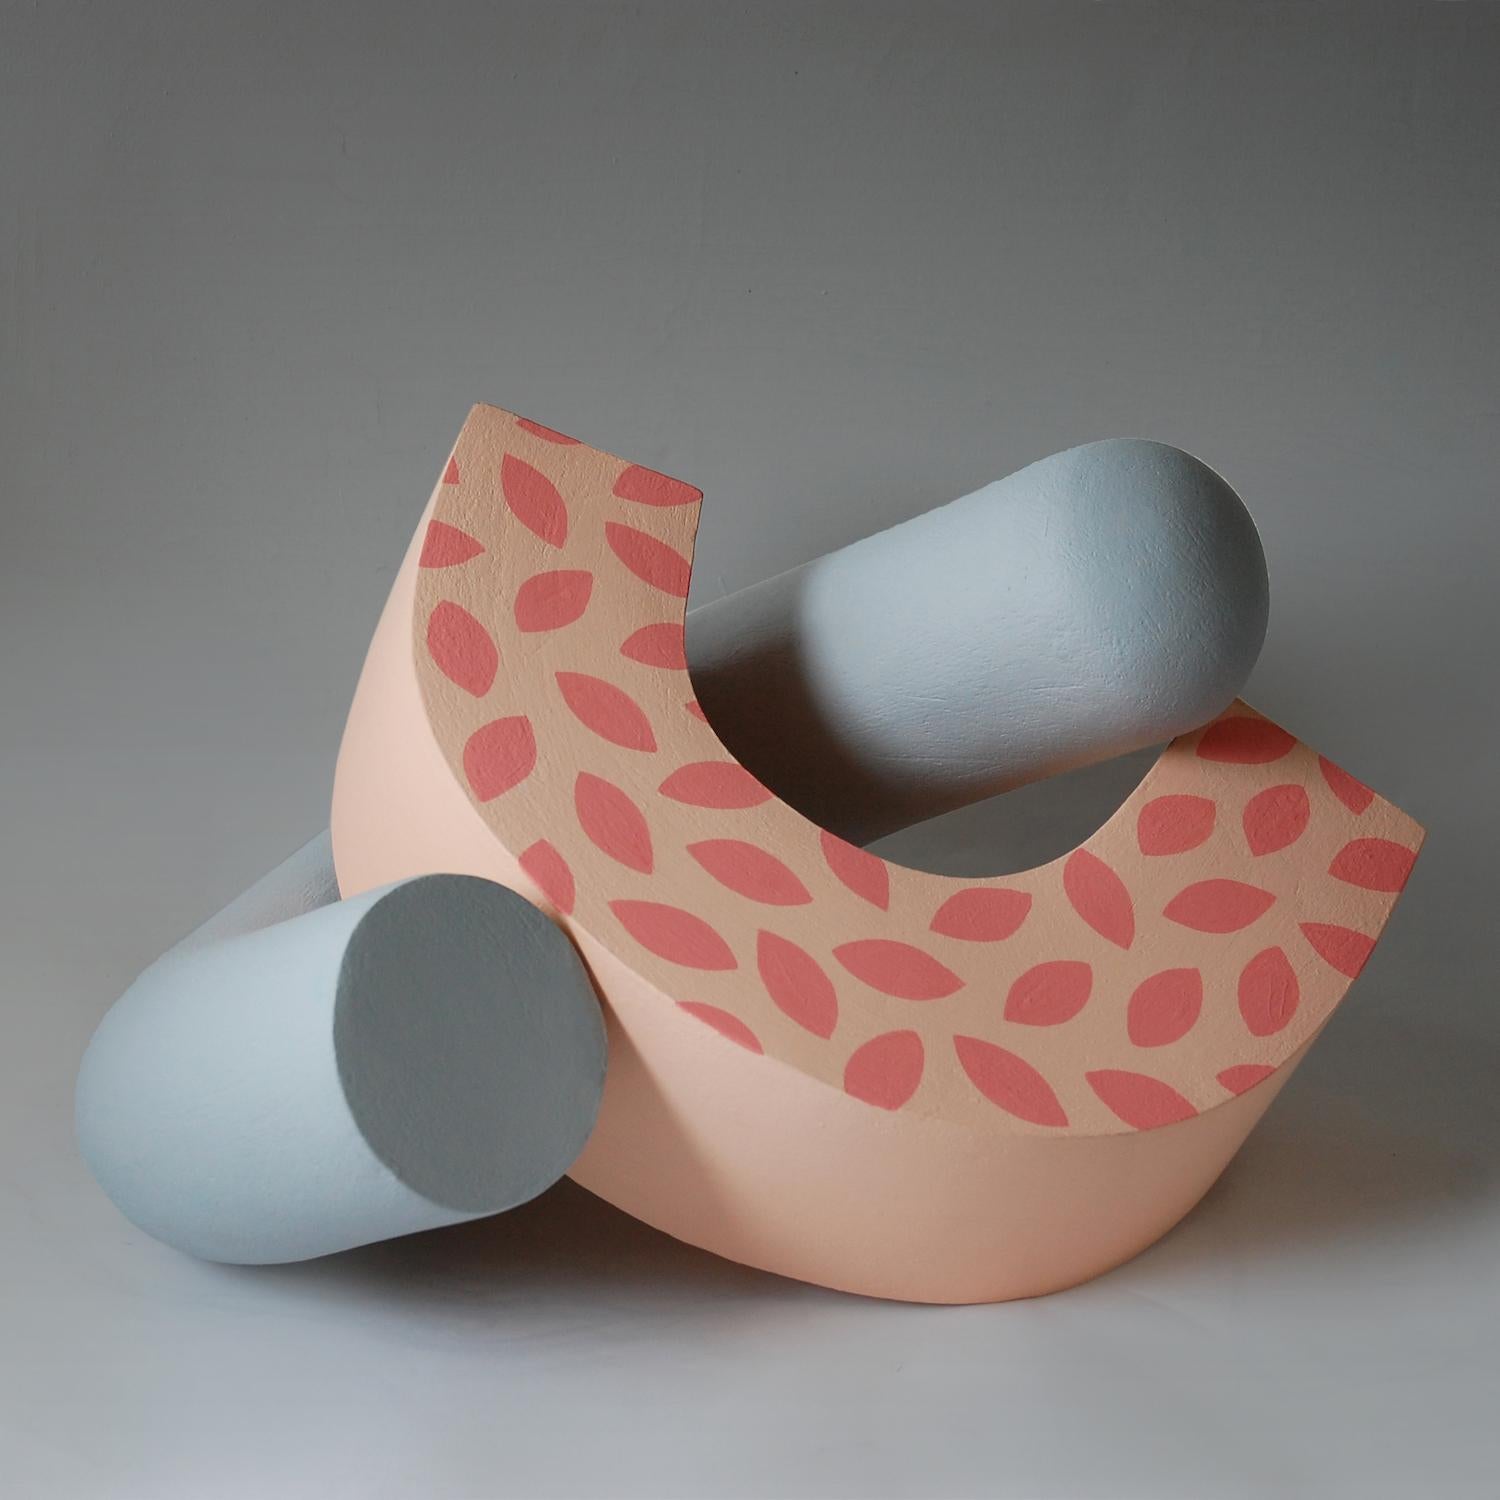 Embrace by Patricia Volk - Abstract ceramic sculpture, painted clay